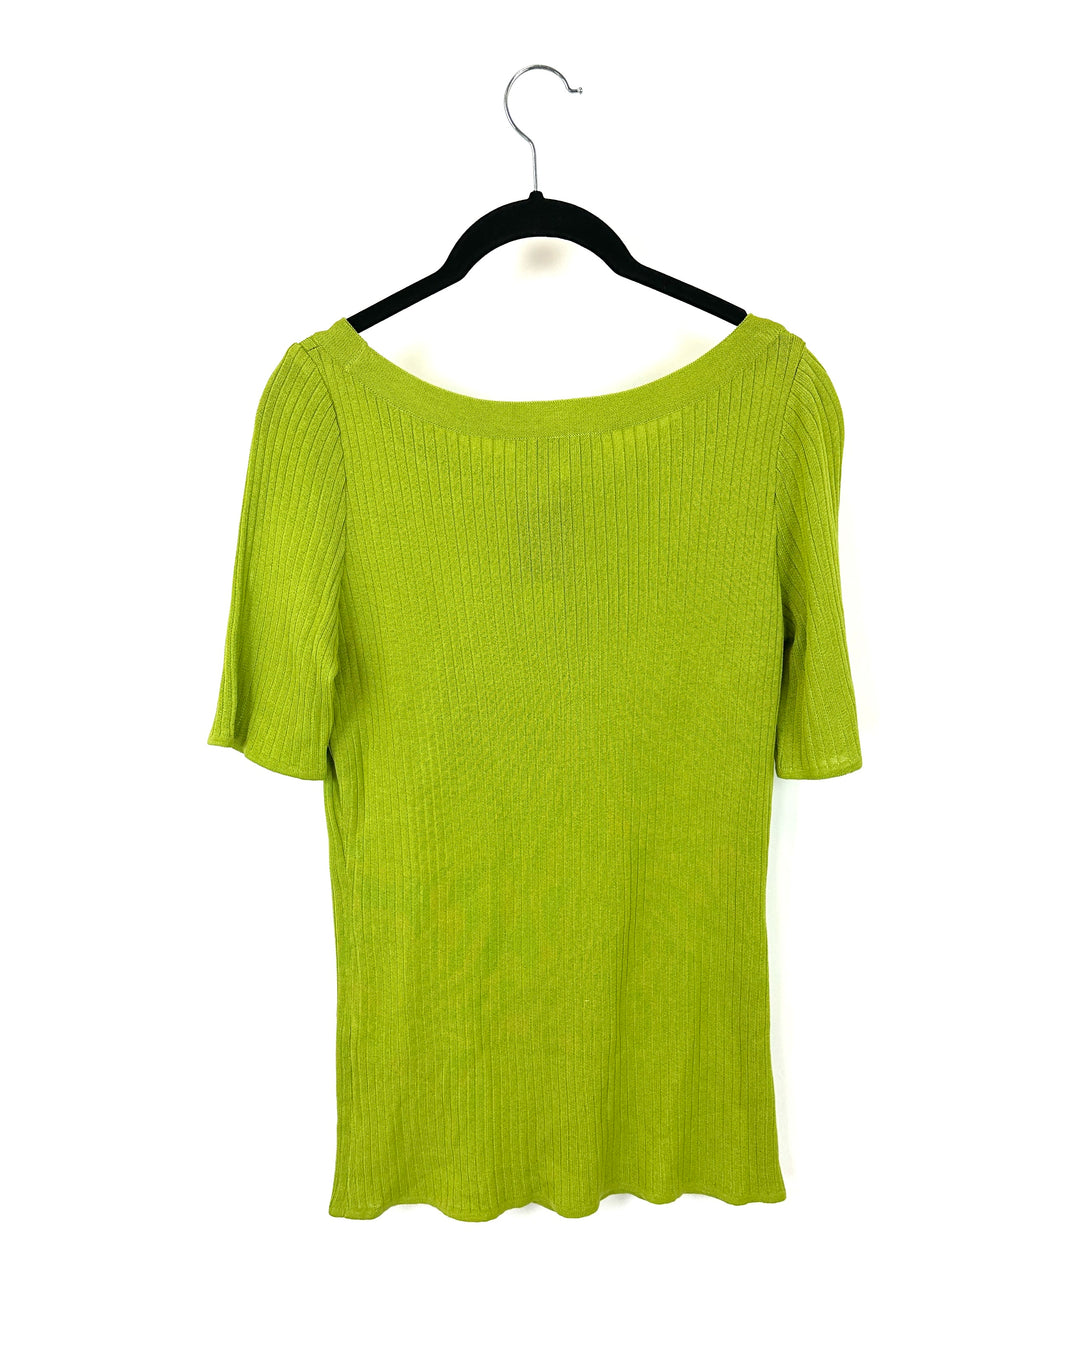 Olive Green Top - Size 2-4